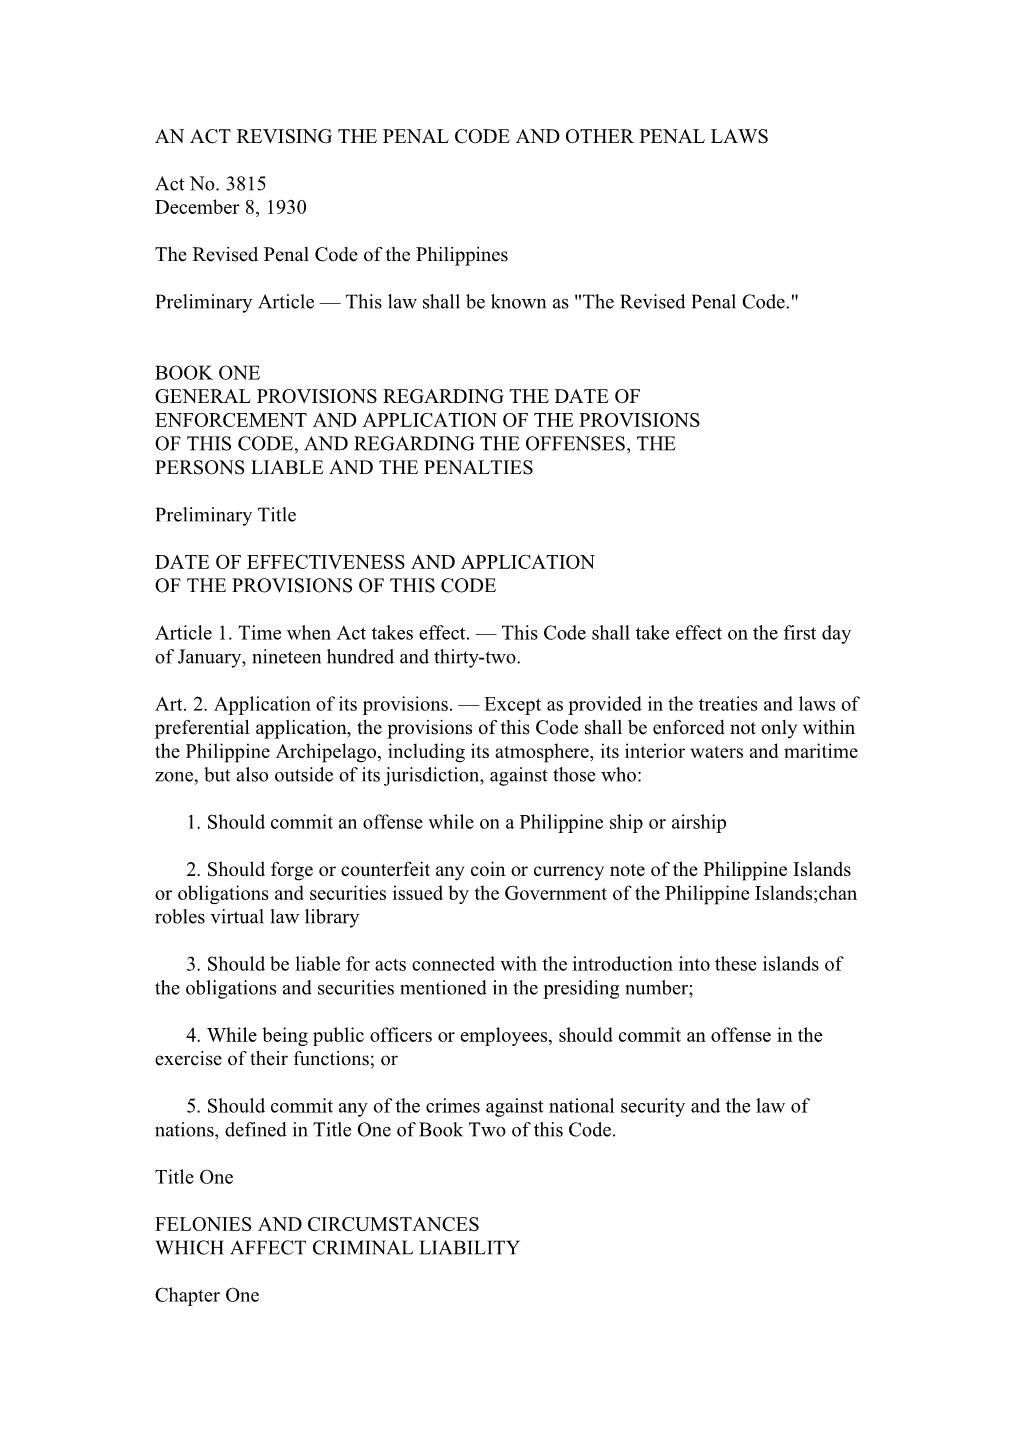 Revised Penal Code of the Philippines